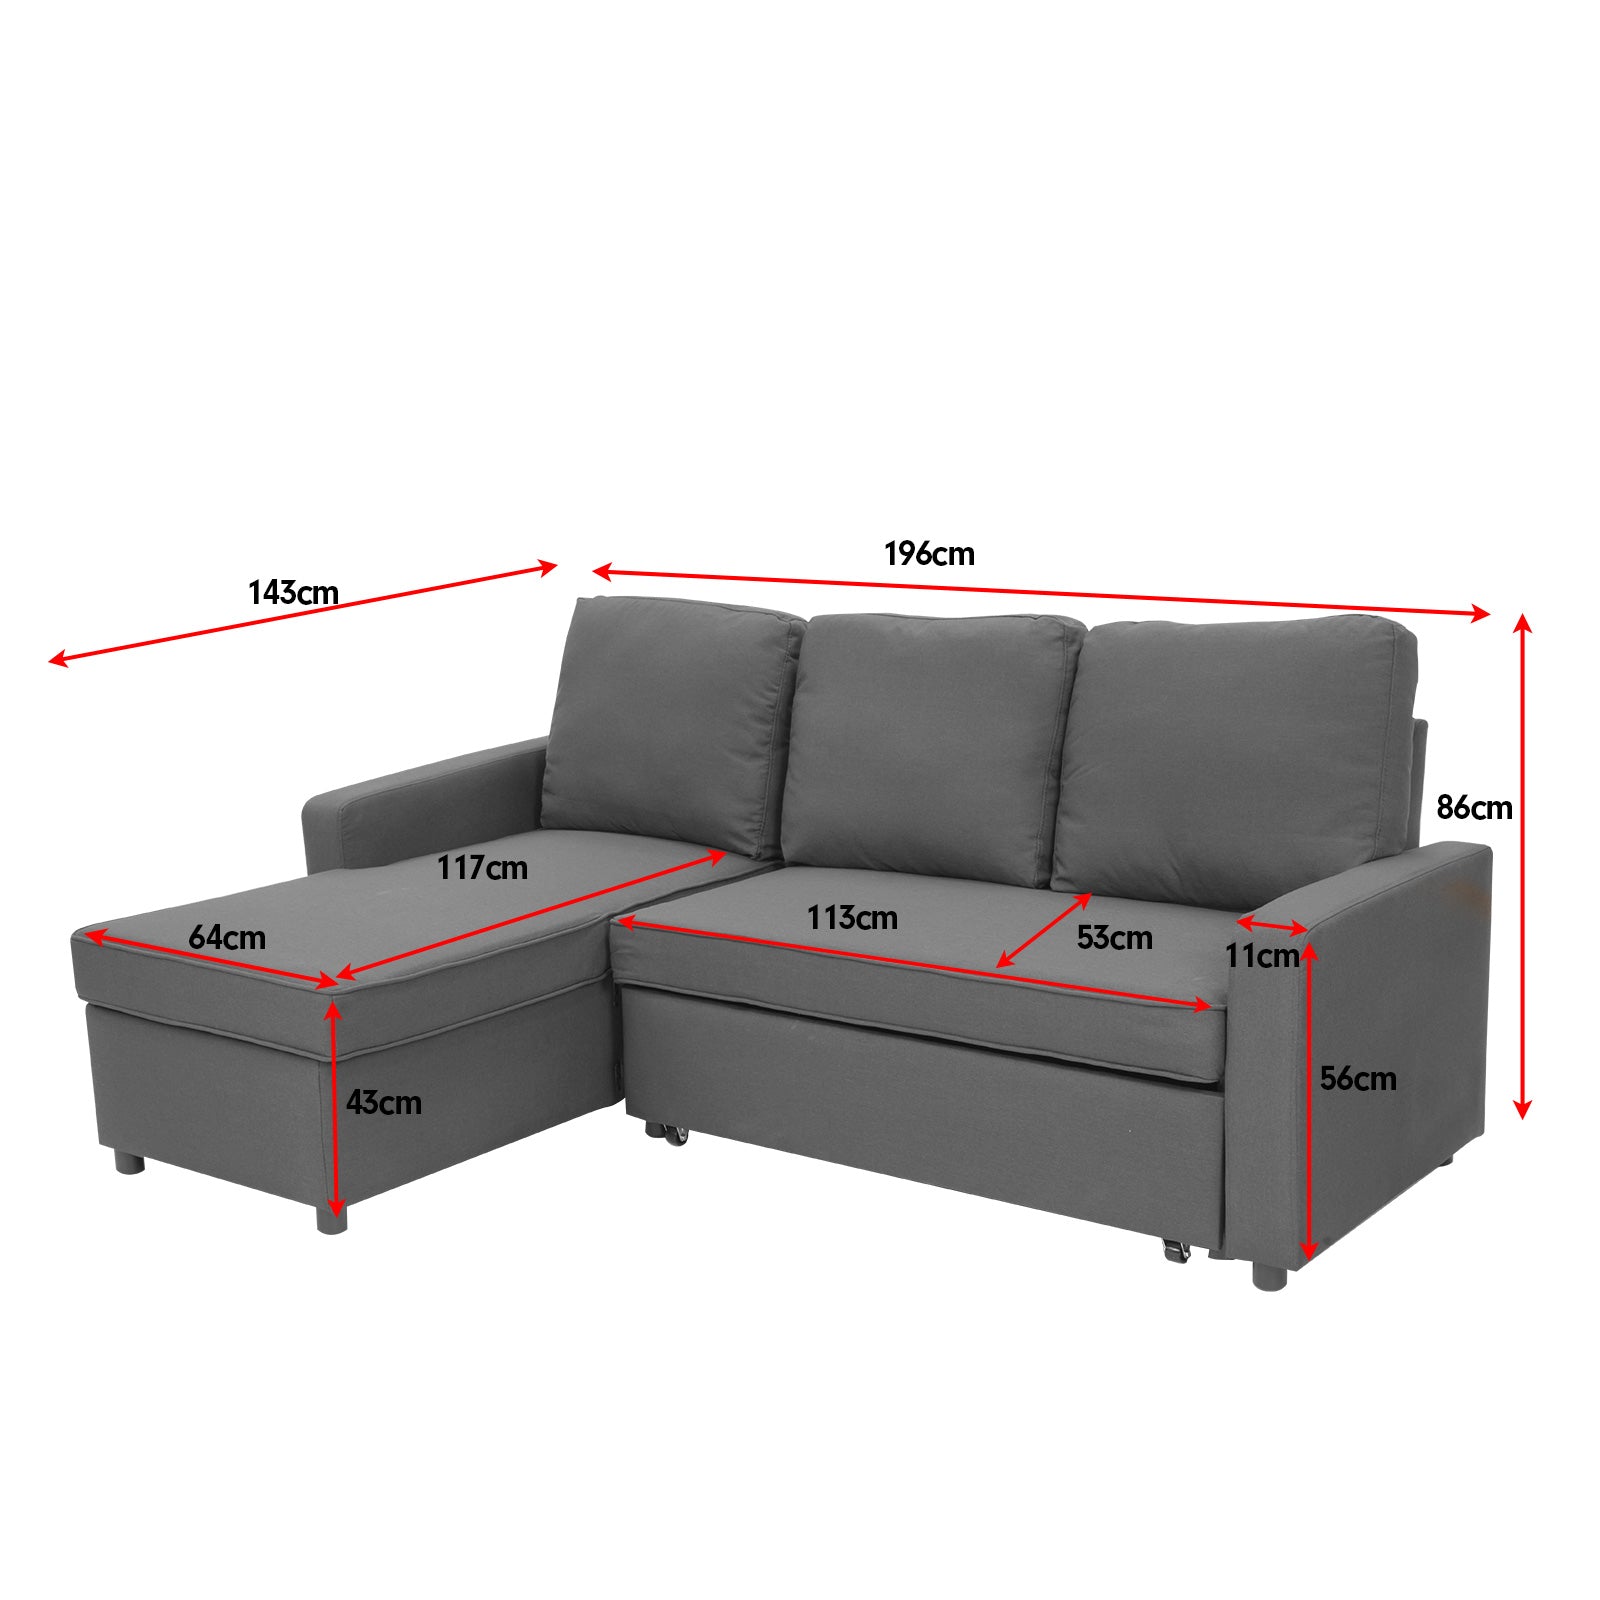 3-seater Corner Sofa Bed With Storage Lounge Chaise Couch - Grey